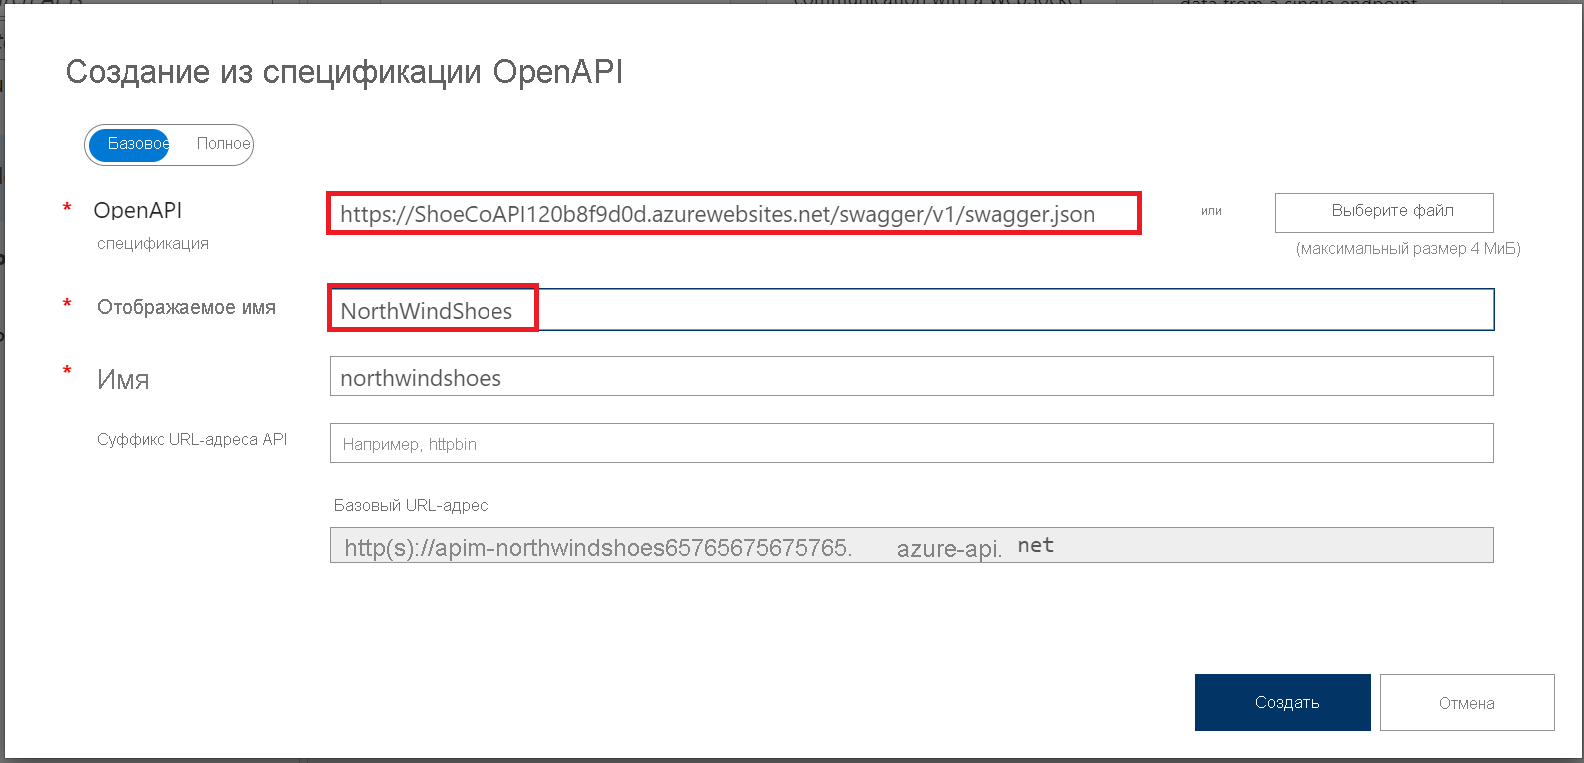 Screenshot of create from OpenAPI specification import settings with OpenAPI specification and display name fields highlighted.